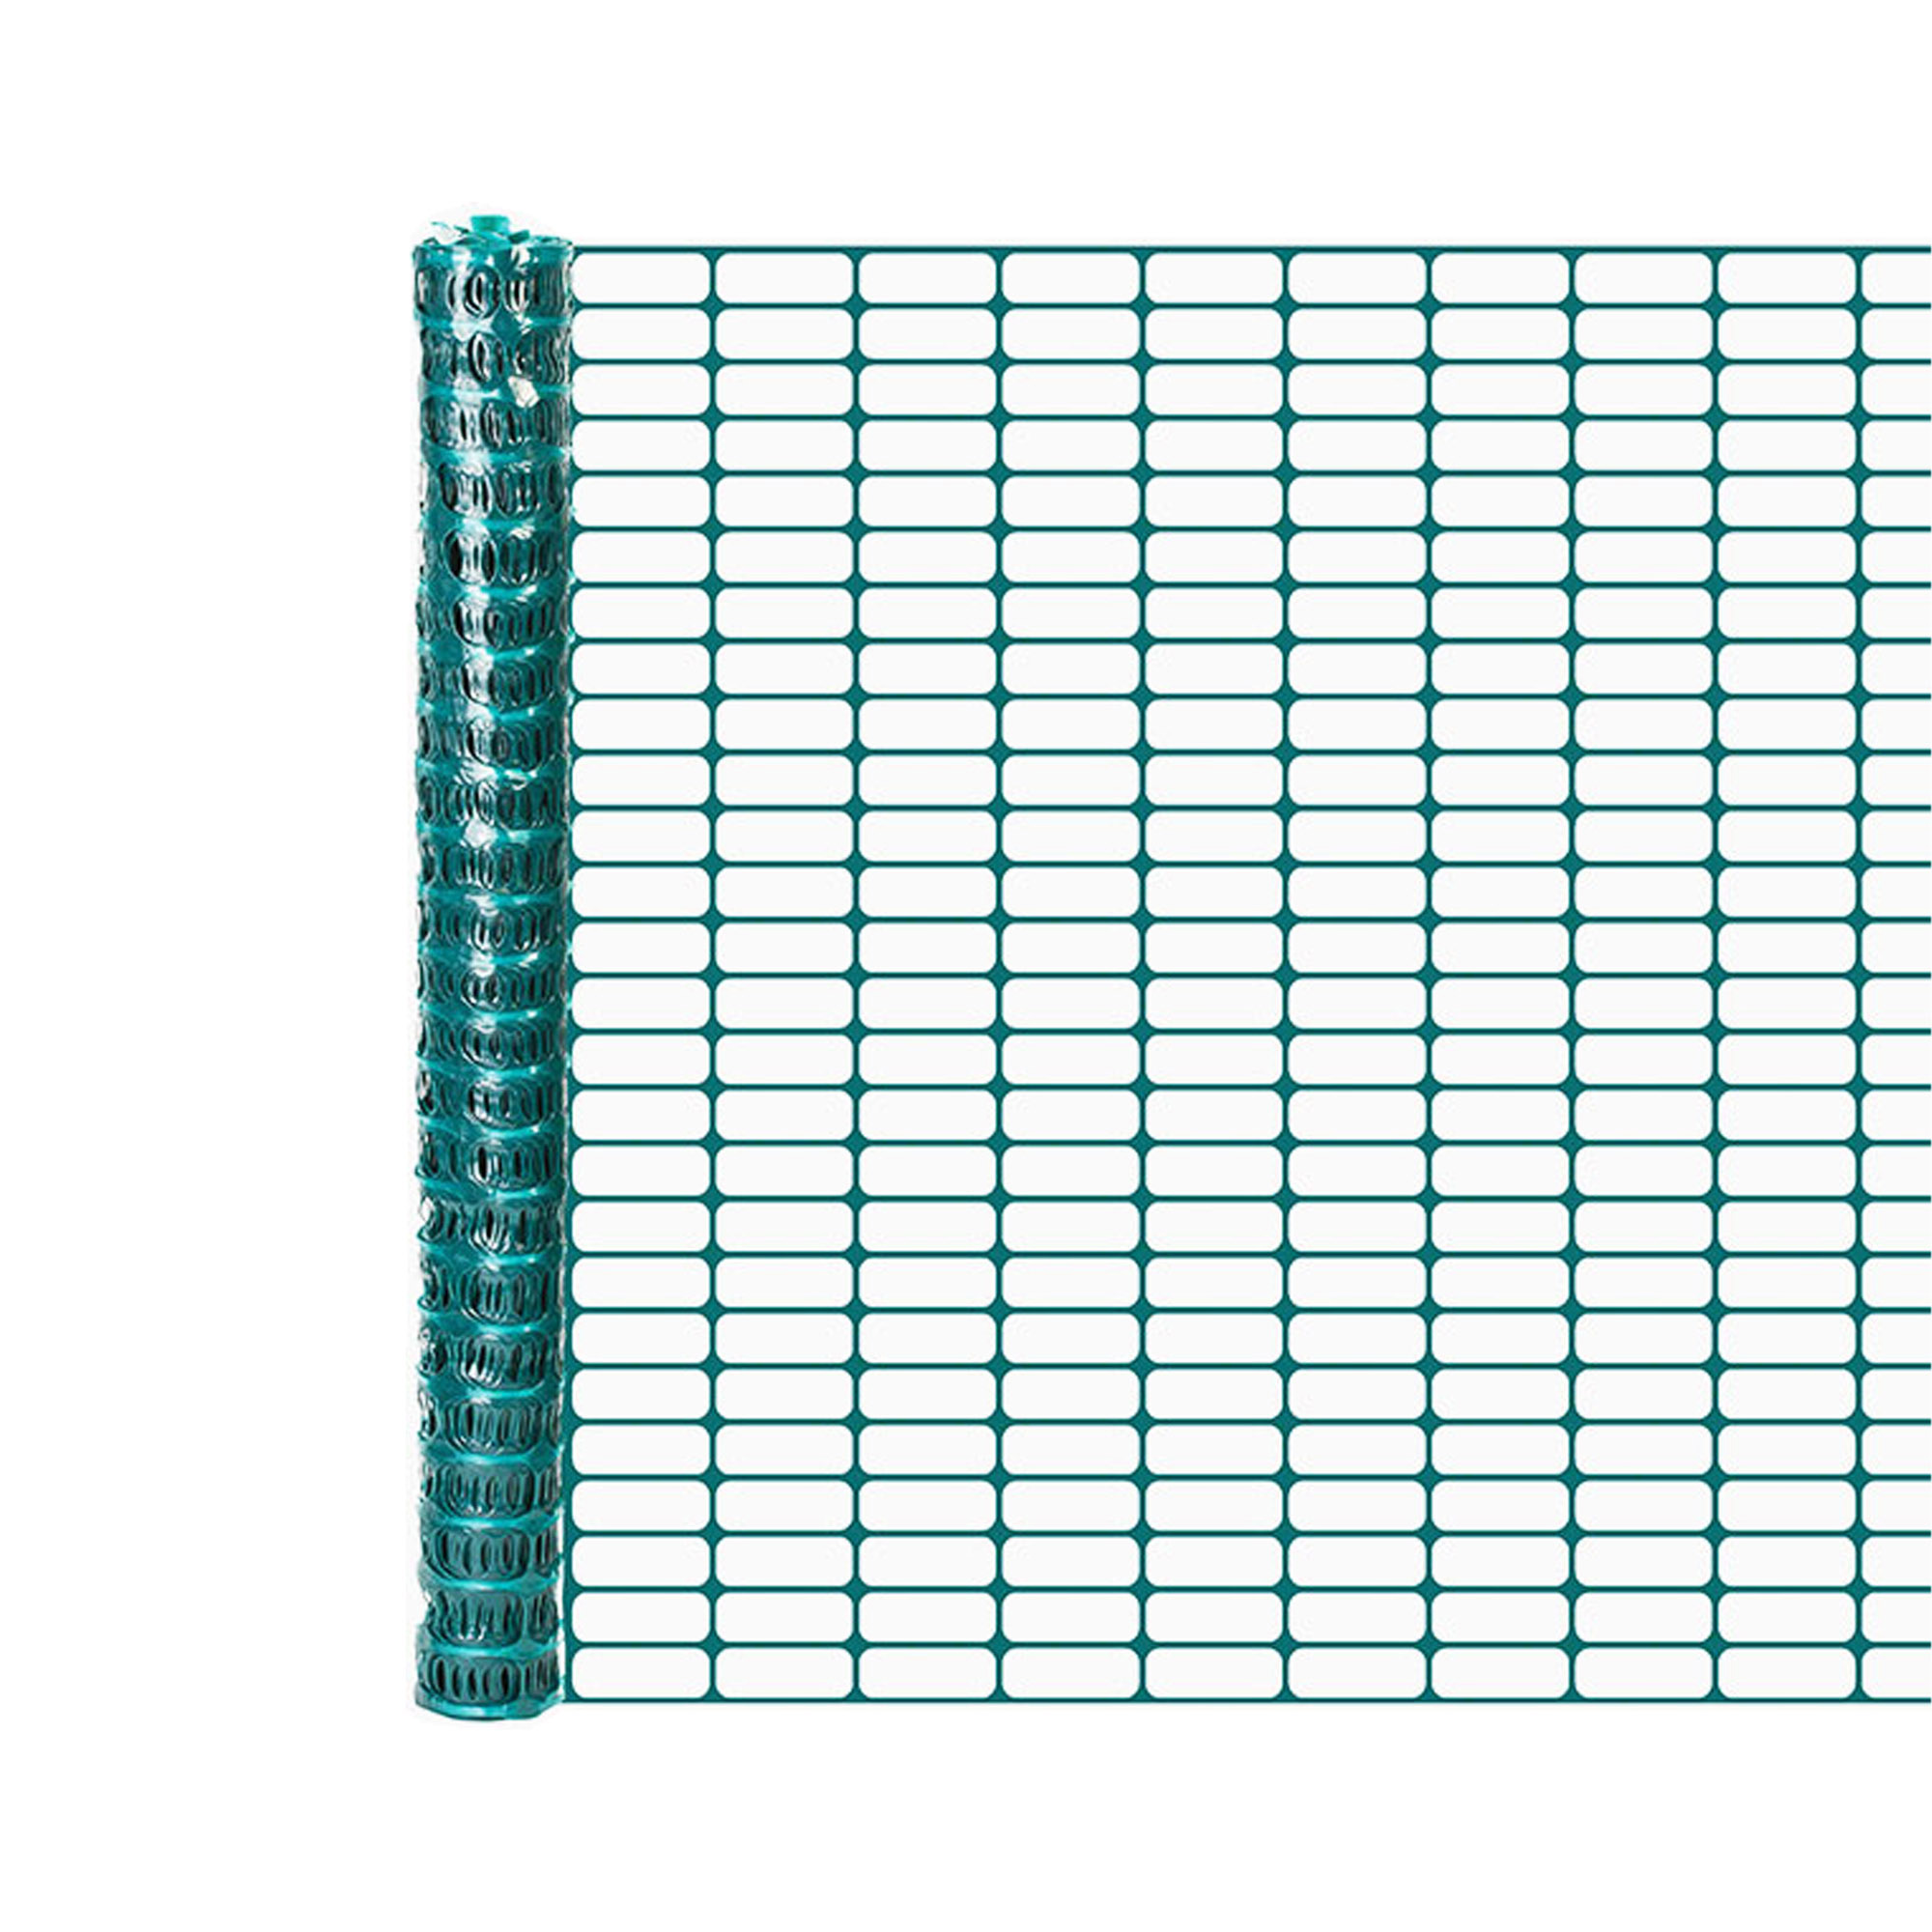 Oriented Oval Mesh Construction Barrier Fence